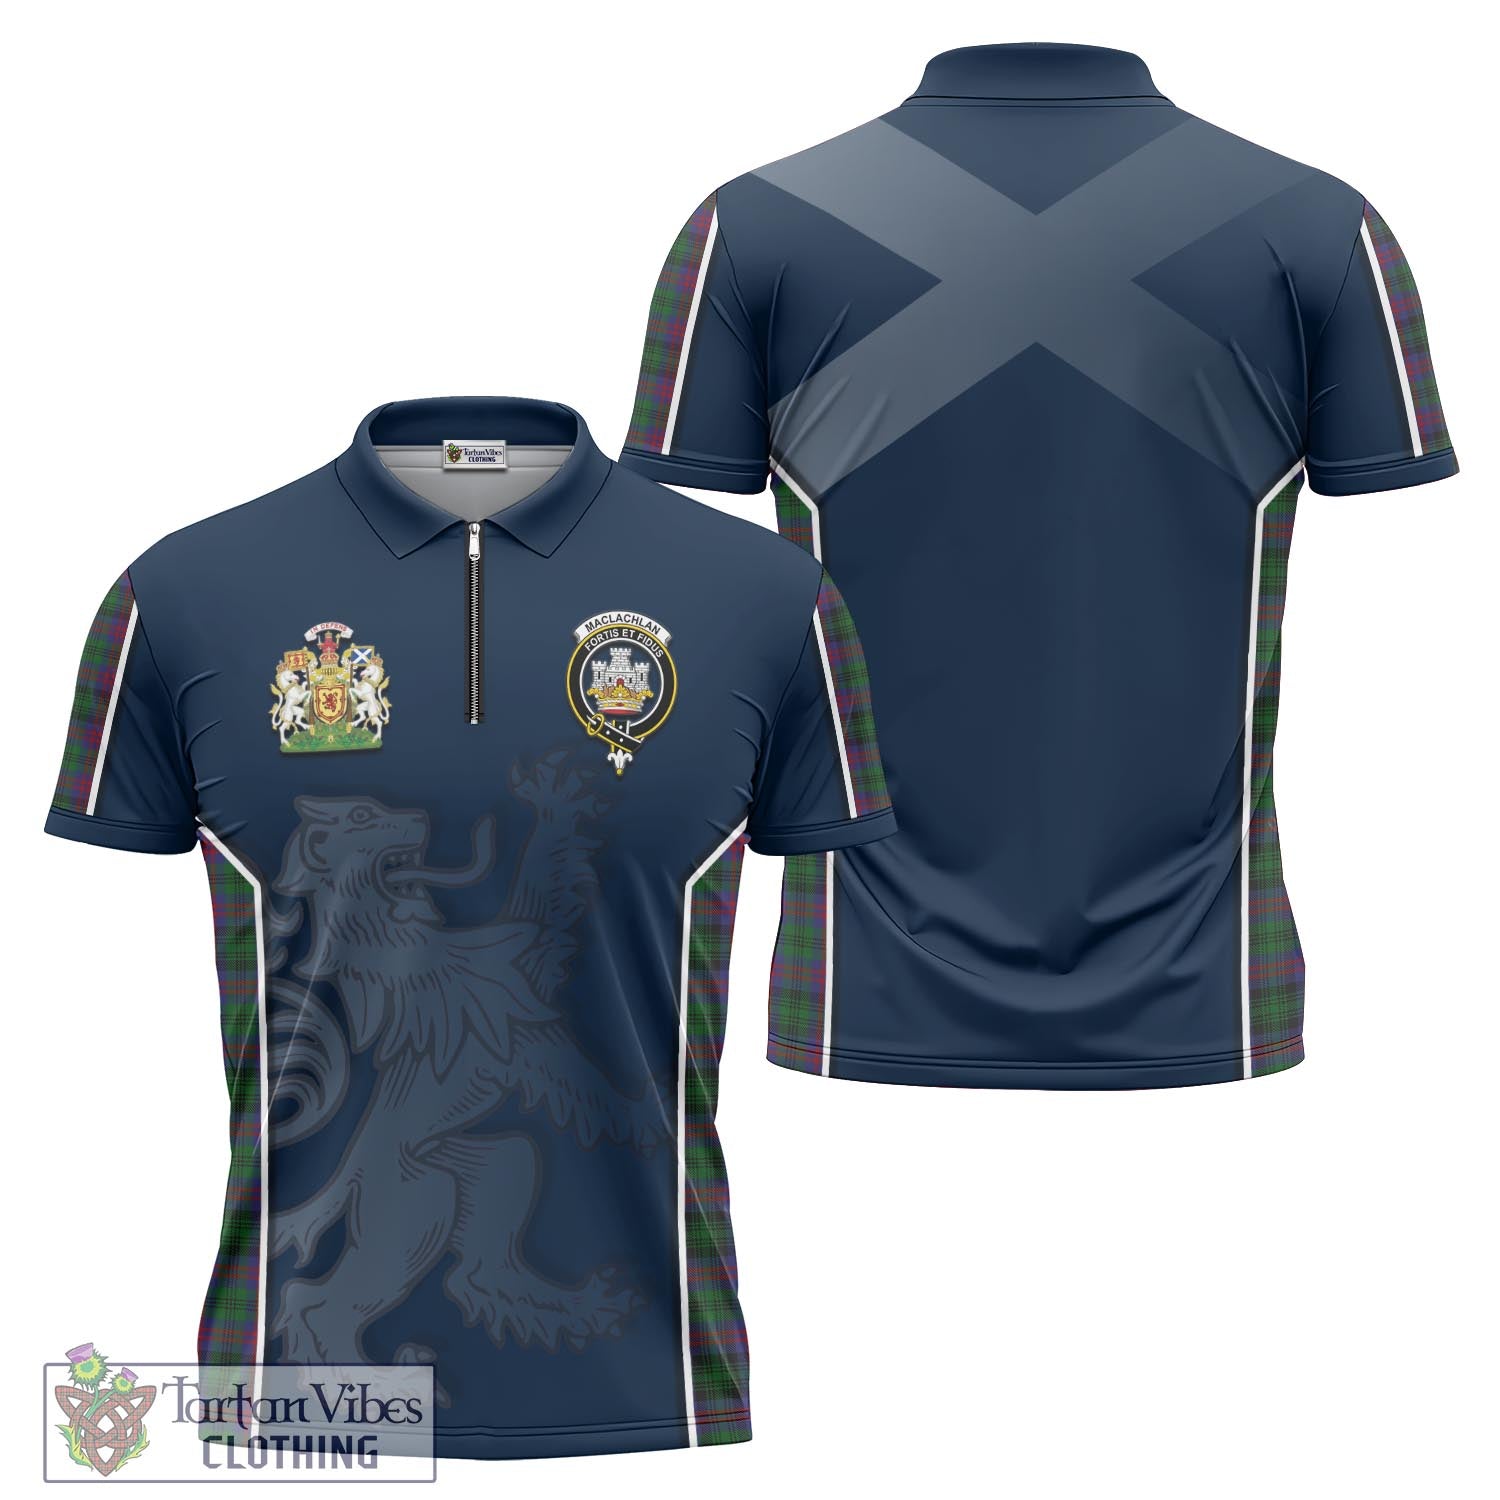 Tartan Vibes Clothing MacLachlan Hunting Tartan Zipper Polo Shirt with Family Crest and Lion Rampant Vibes Sport Style